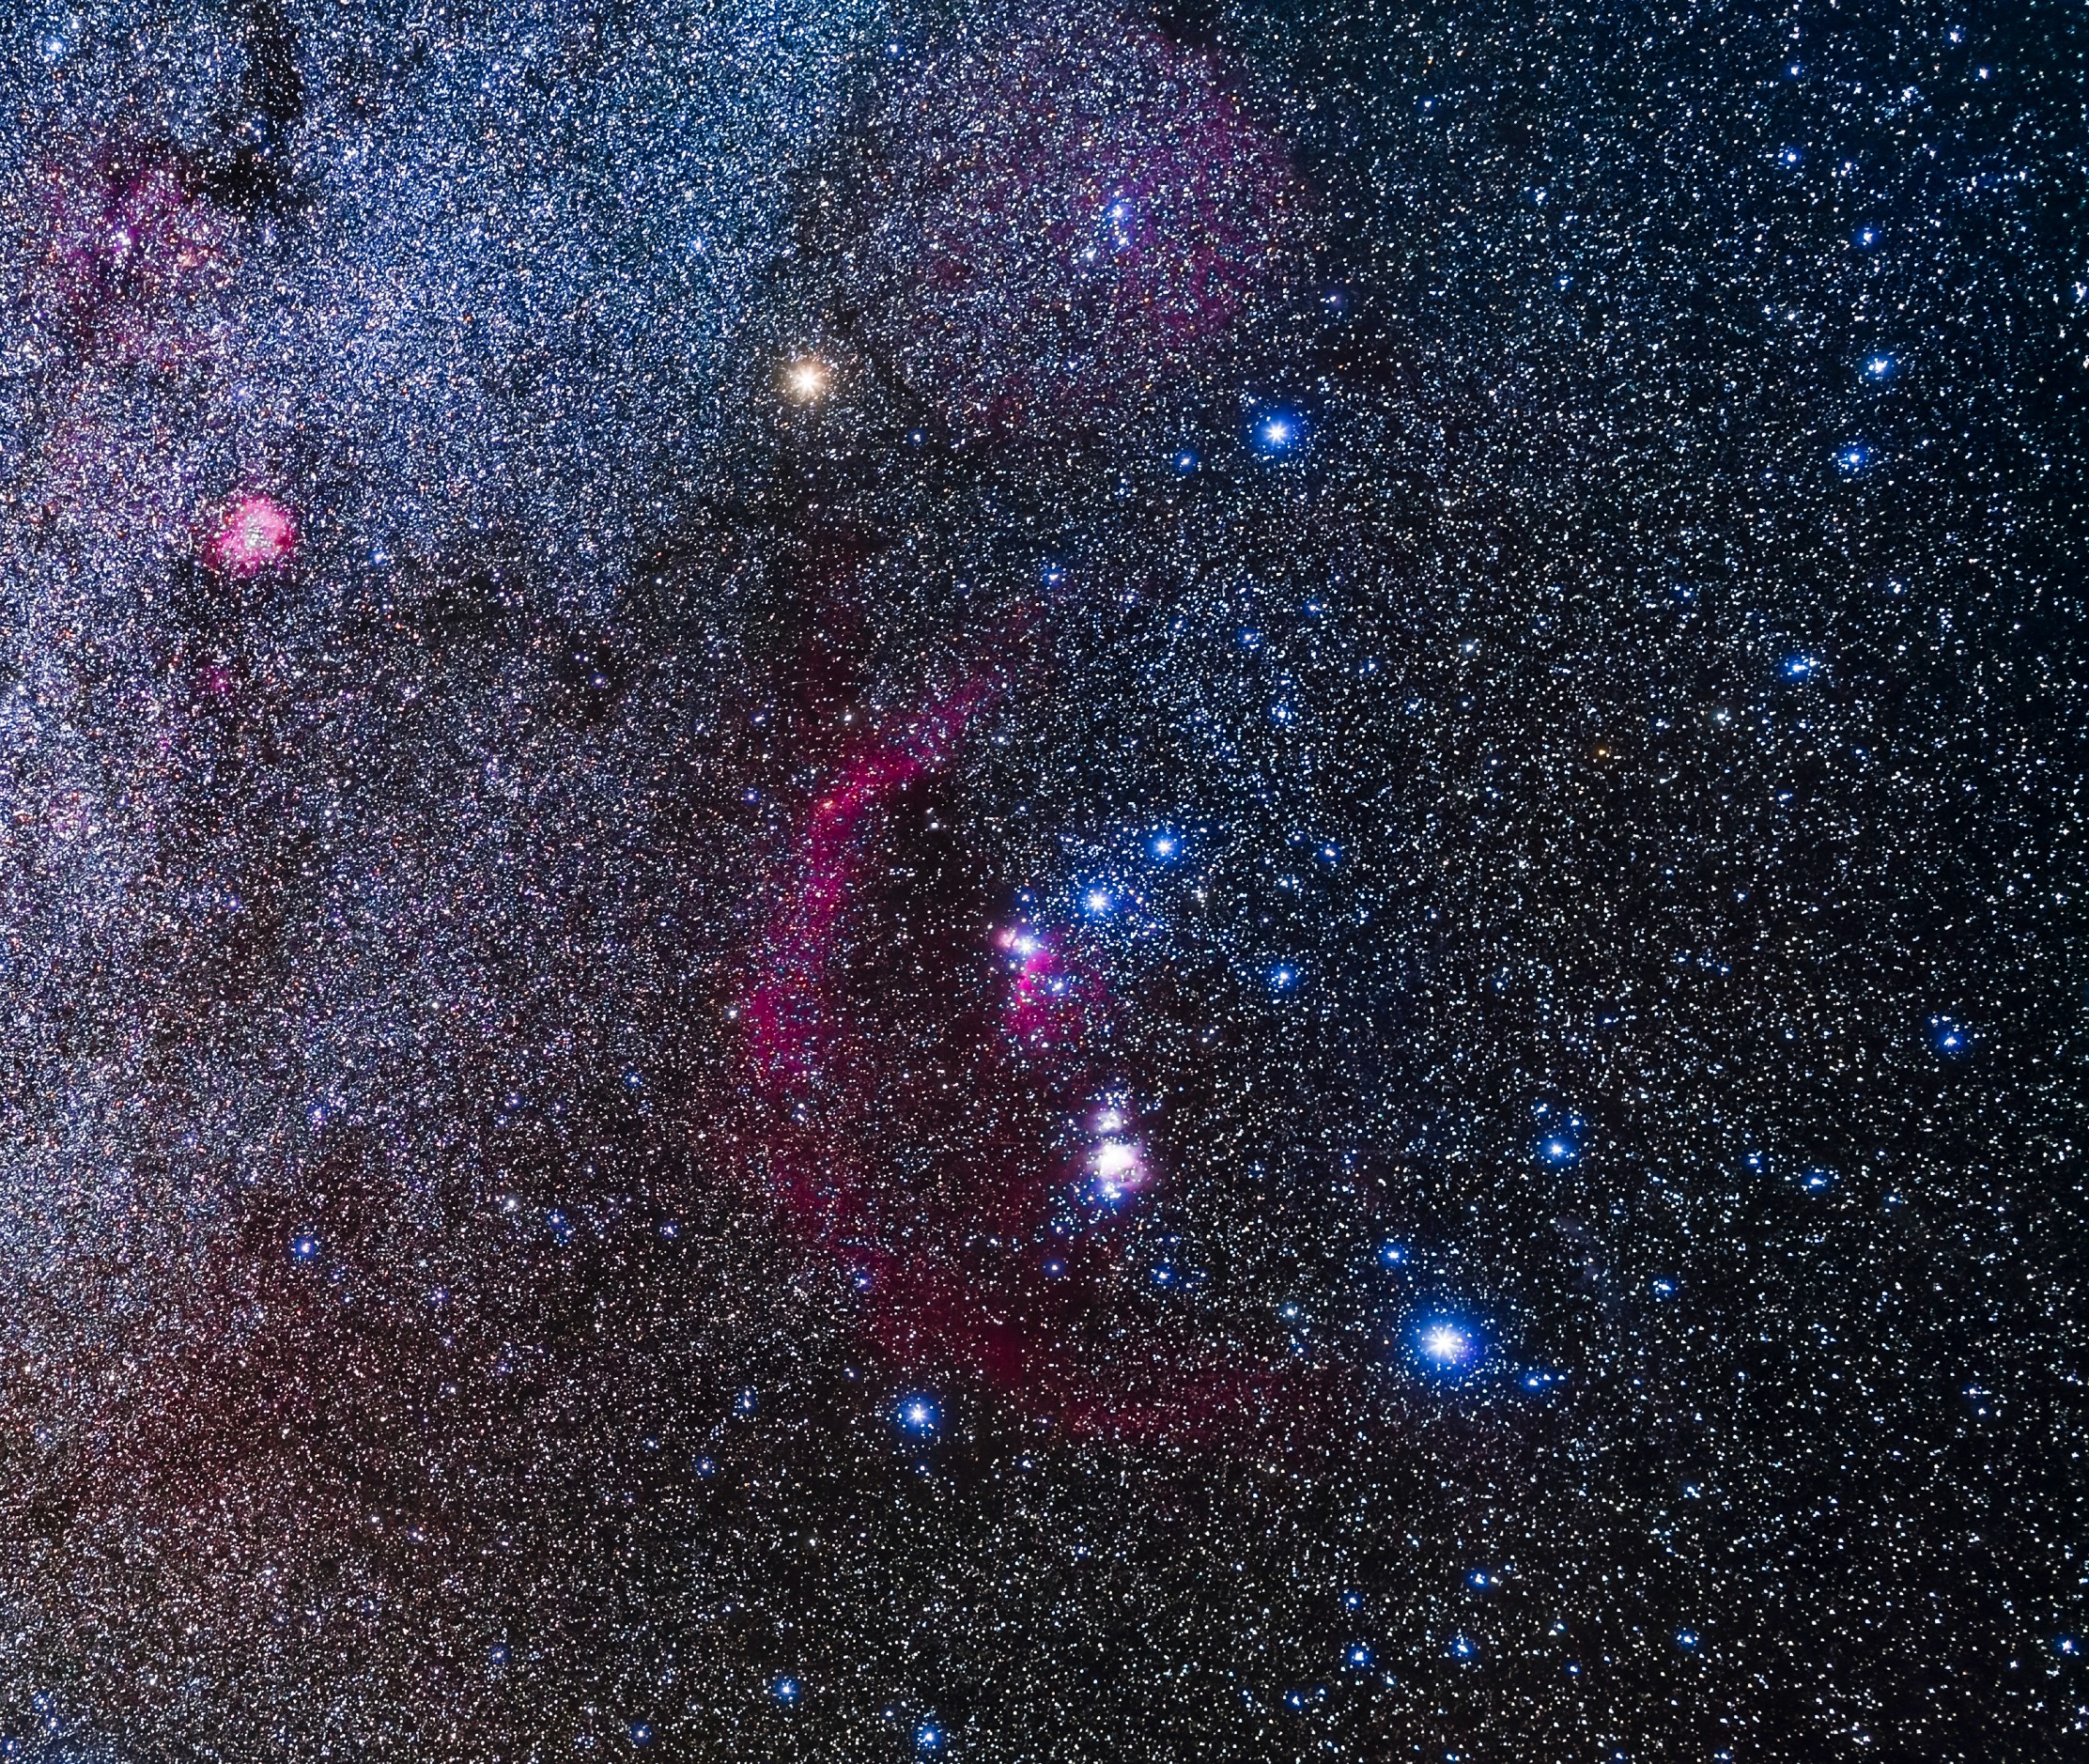 a photo of the constellation Orion and the nebula in a star-studded sky